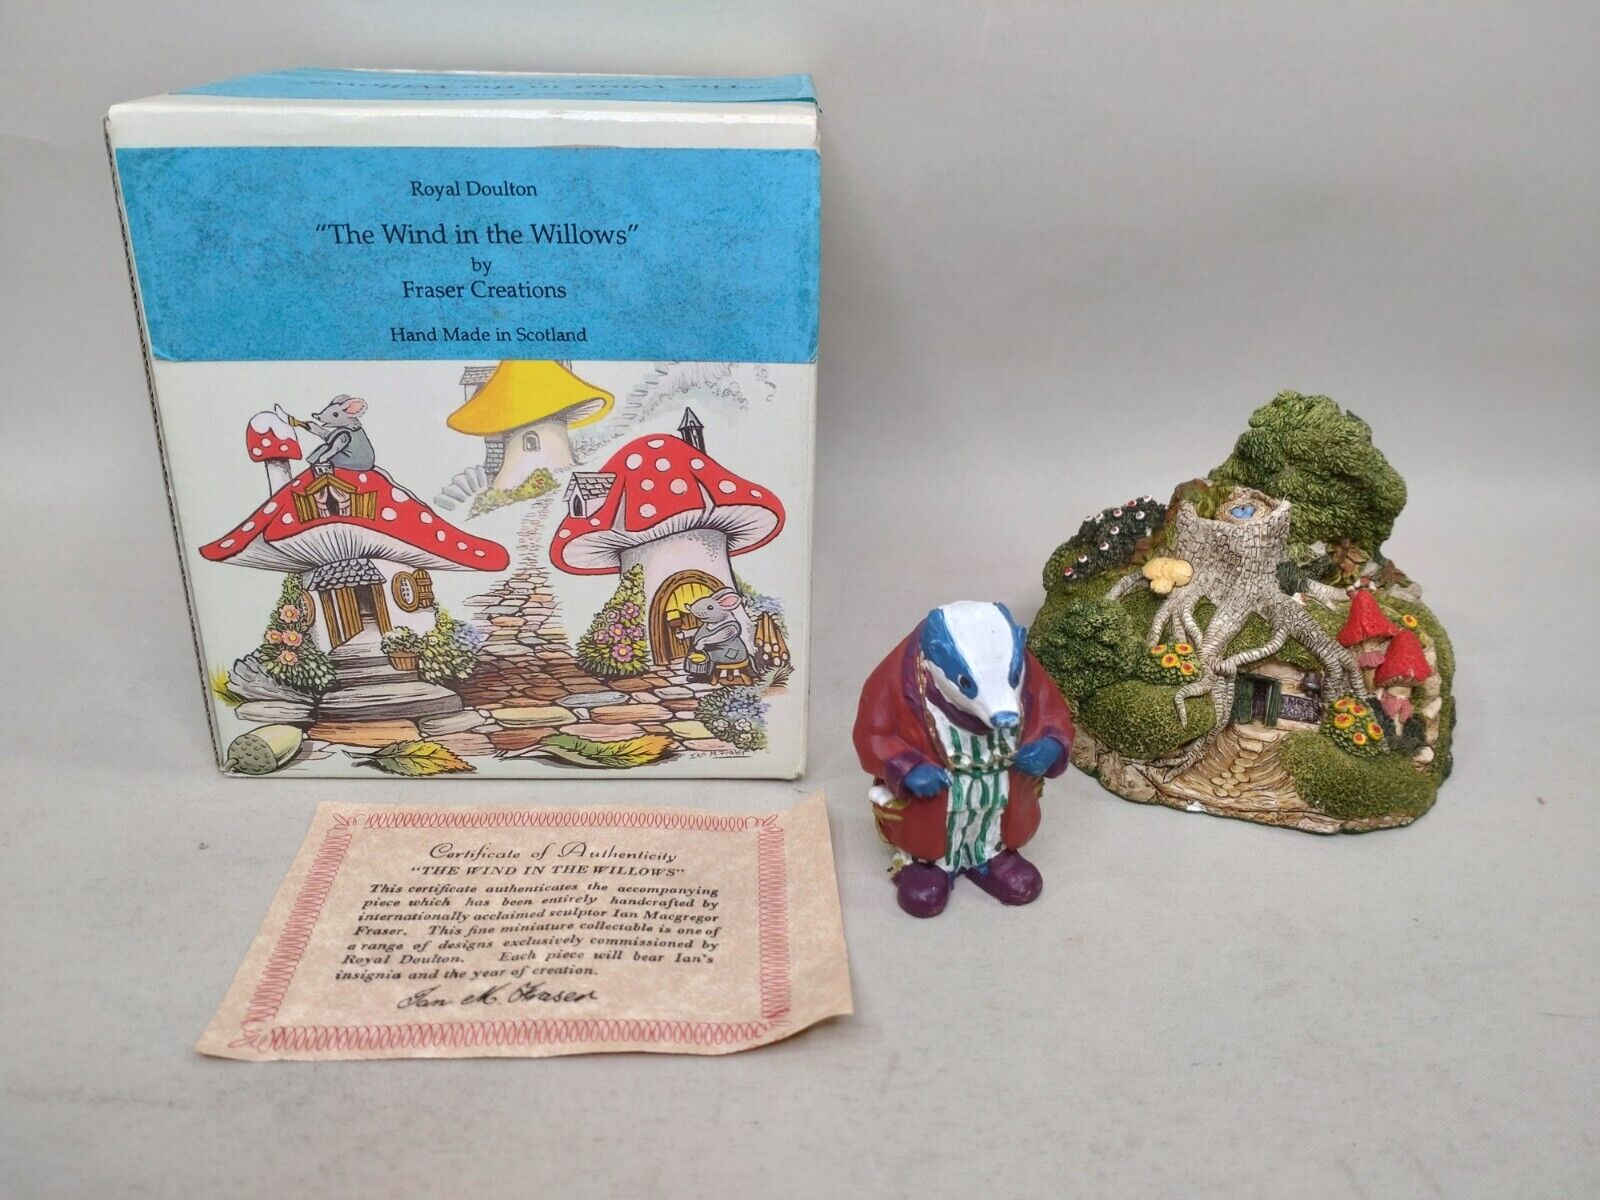 RARE ROYAL DOULTON WIND IN THE WILLOWS BADGER\'S HOUSE BY FRASER CREATIONS